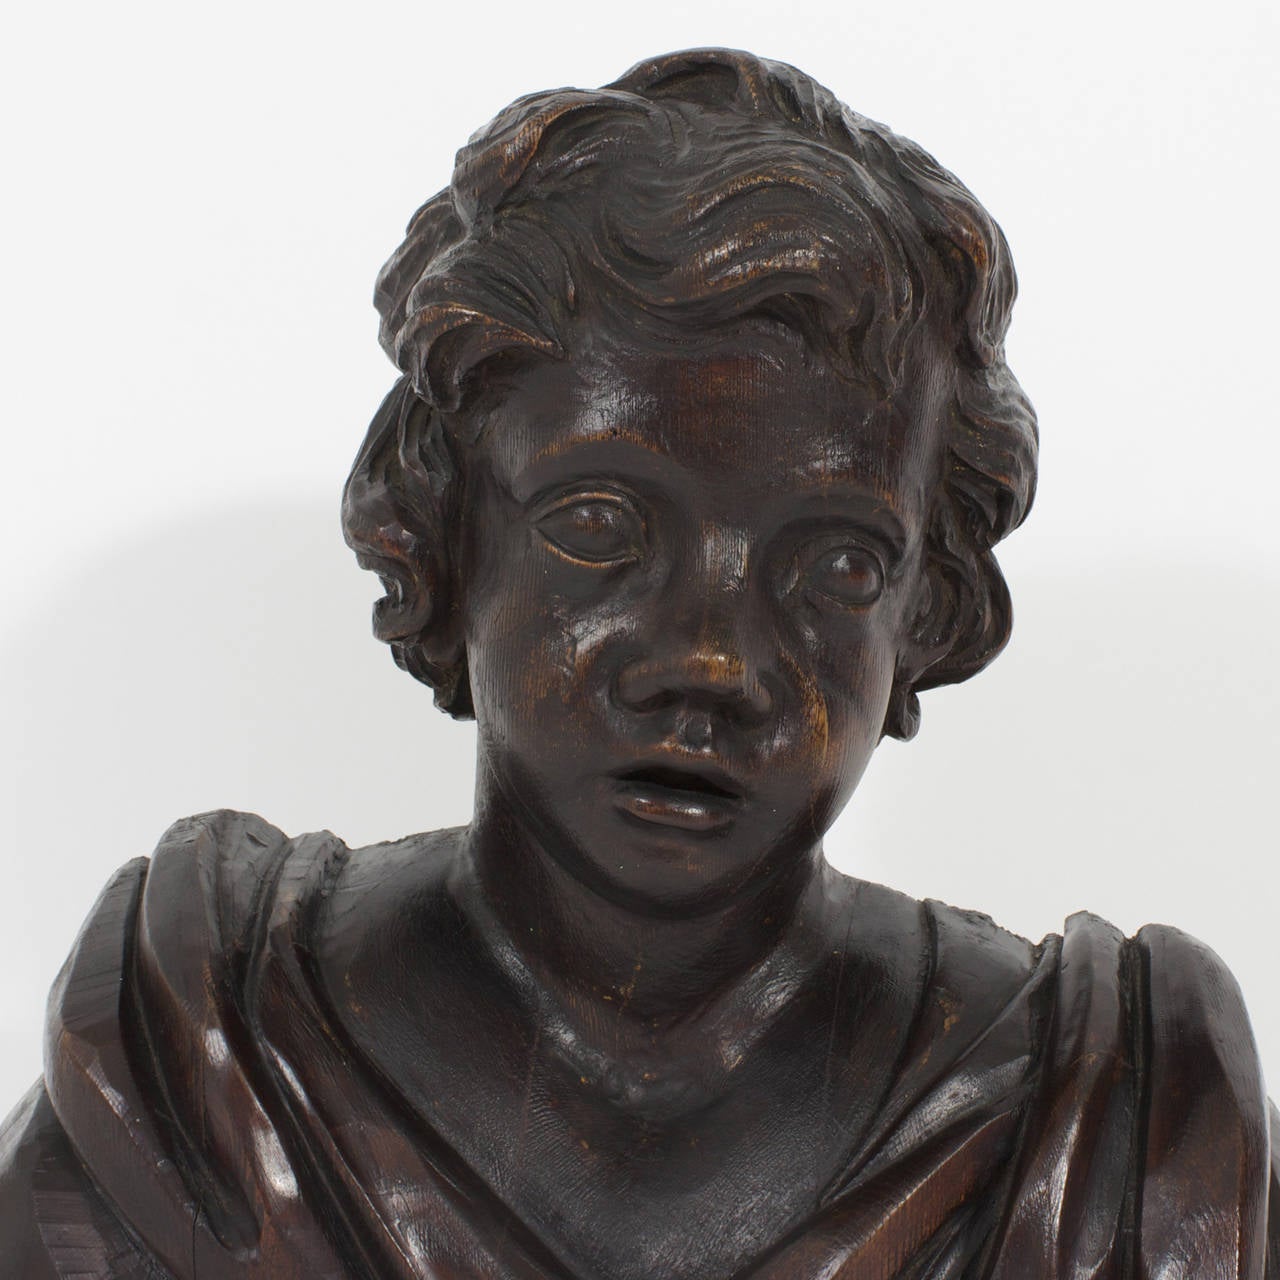 Baroque 19th Century Wall Mounted or Standing Cherub Sculpture